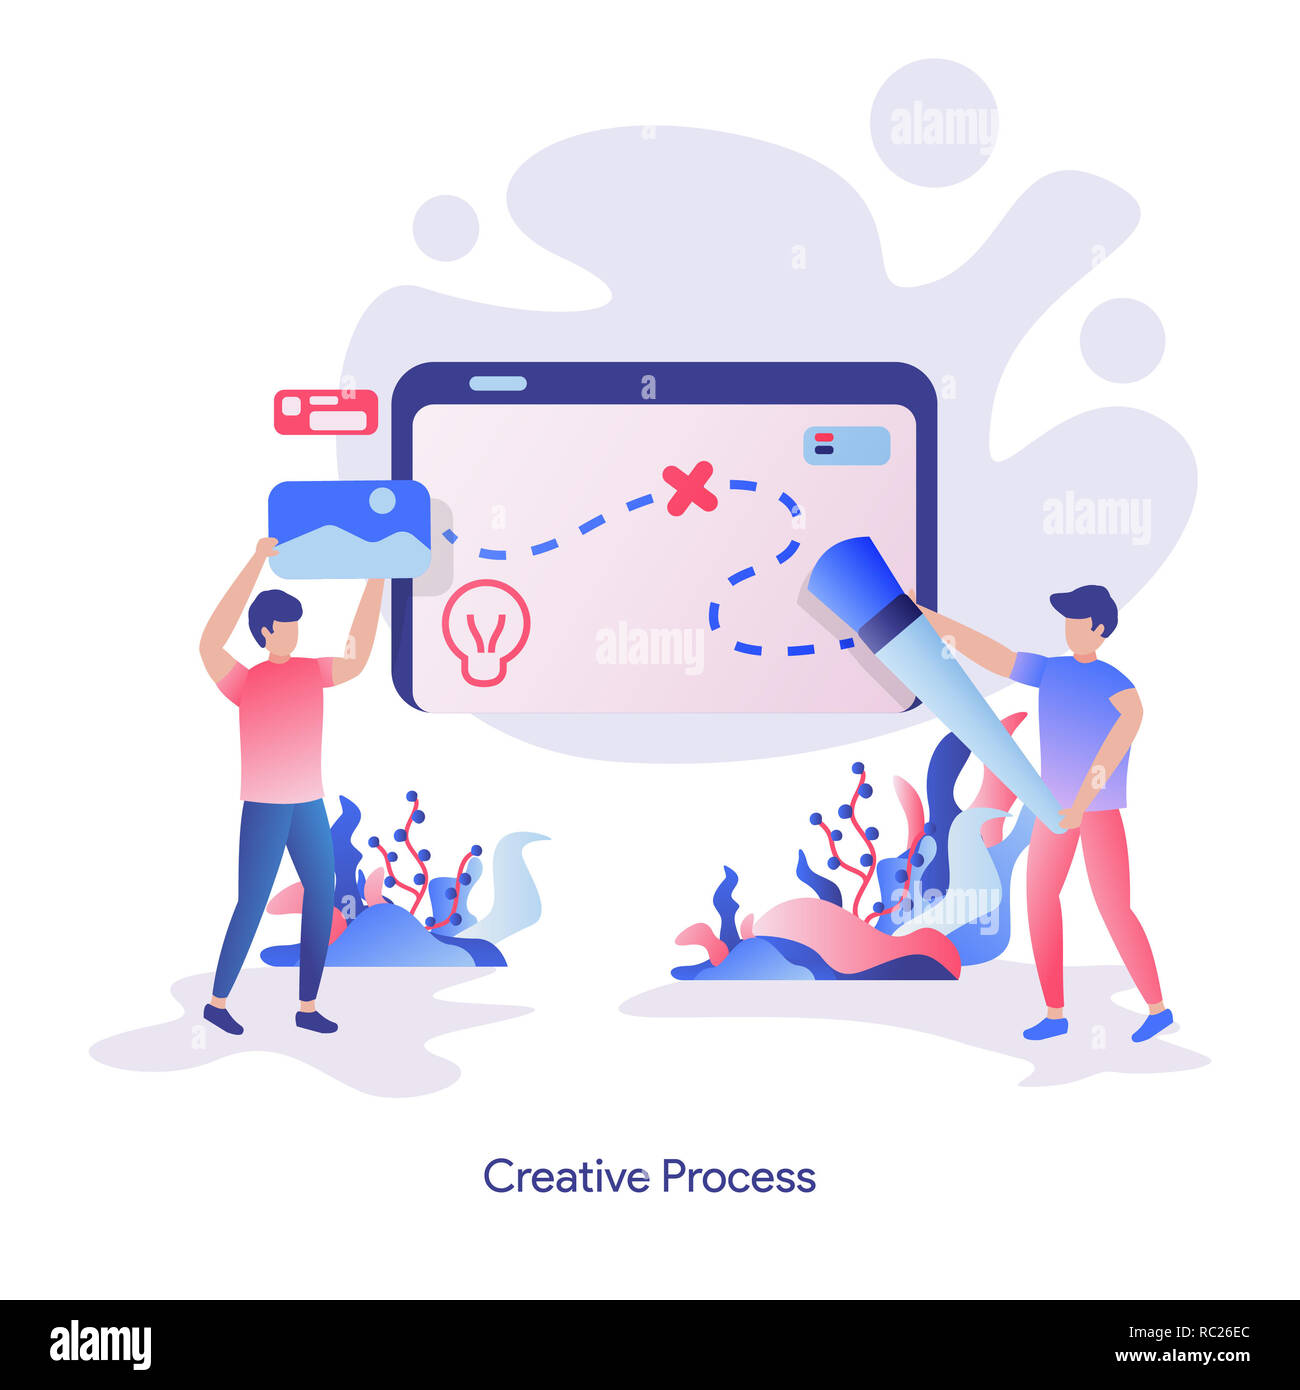 Vector illustration of Creative Process, a man carrying a brush and a man put a picture on the board. Modern vector illustration concepts for developi Stock Photo